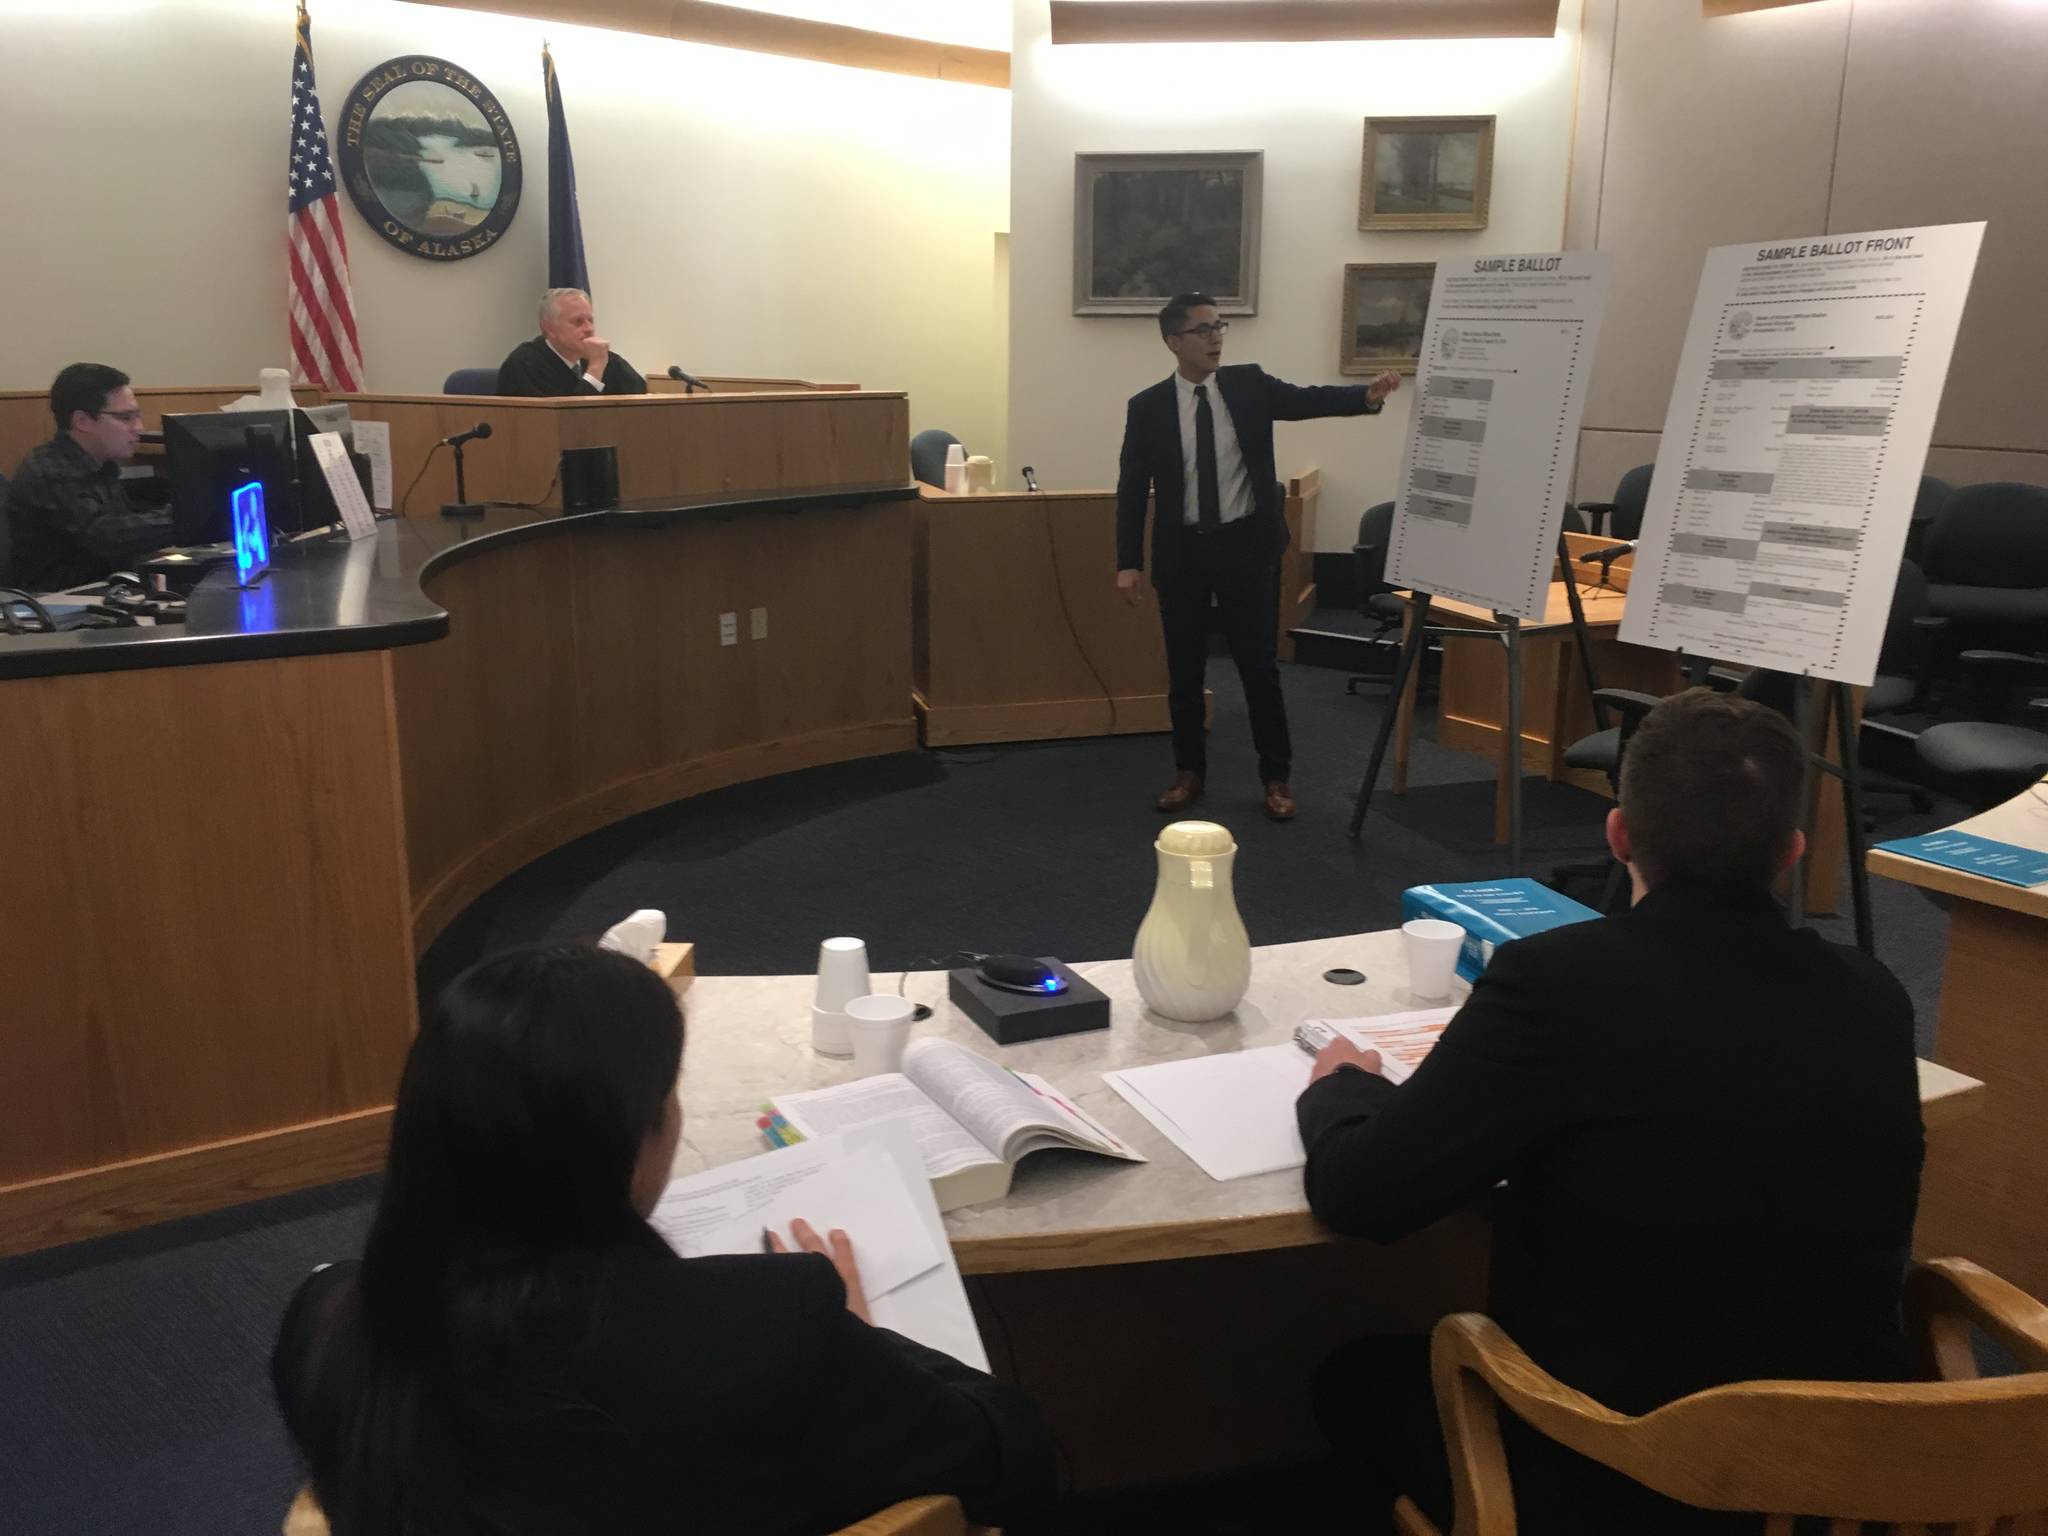 State attorneys Elizabeth Bakalar, foreground left, and Margaret Paton-Walsh, foreground right, listen to arguments made by attorney Jon Choate on Thursday, Sept. 21, 2017 in Alaska Superior Court in Juneau. At background left is Judge Philip Pallenberg. (James Brooks | Juneau Empire file)